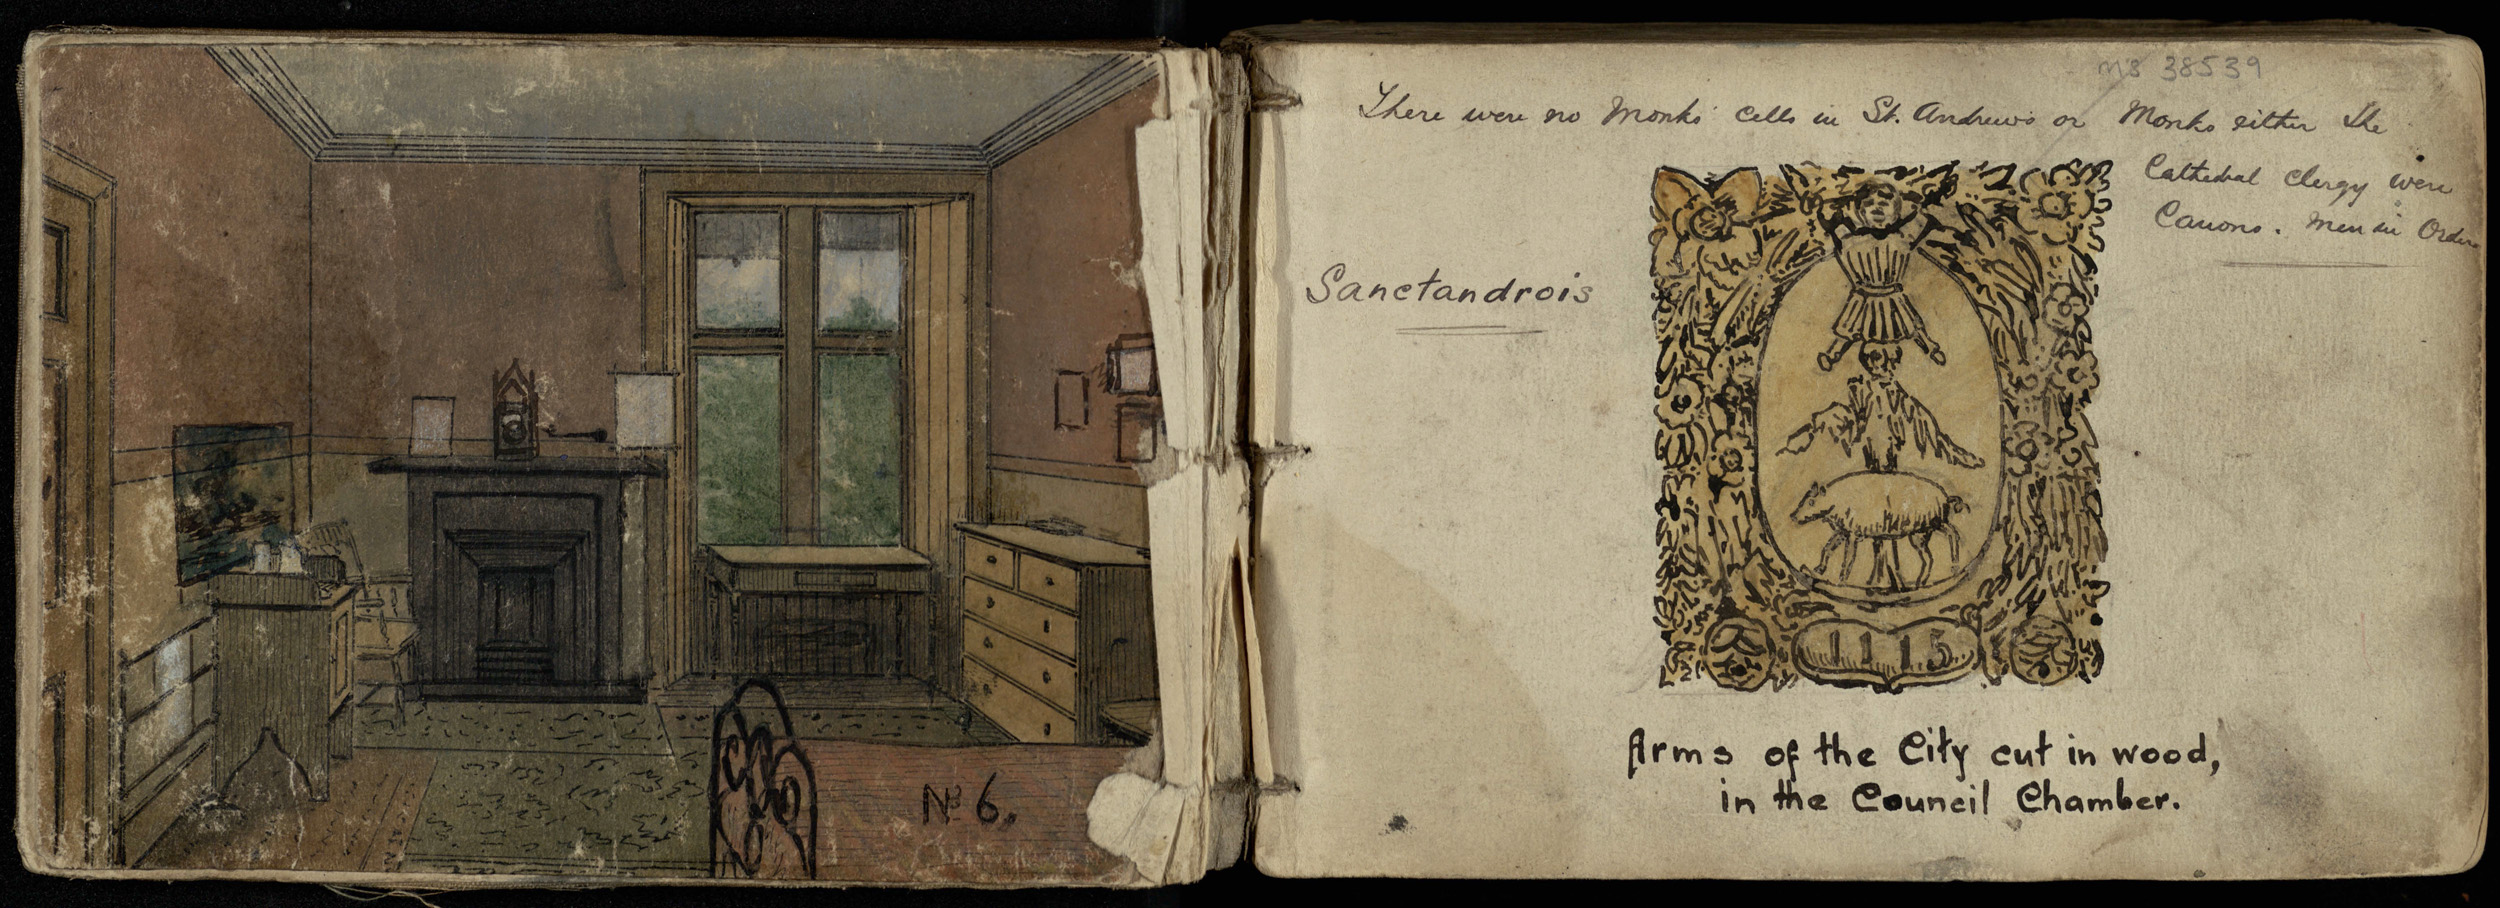 From the sketchbook of John N. Bonthron, depicting his bedroom on South Street and a sketch of the coat of arms of St Andrews found in the City Council Chambers (ms38539)